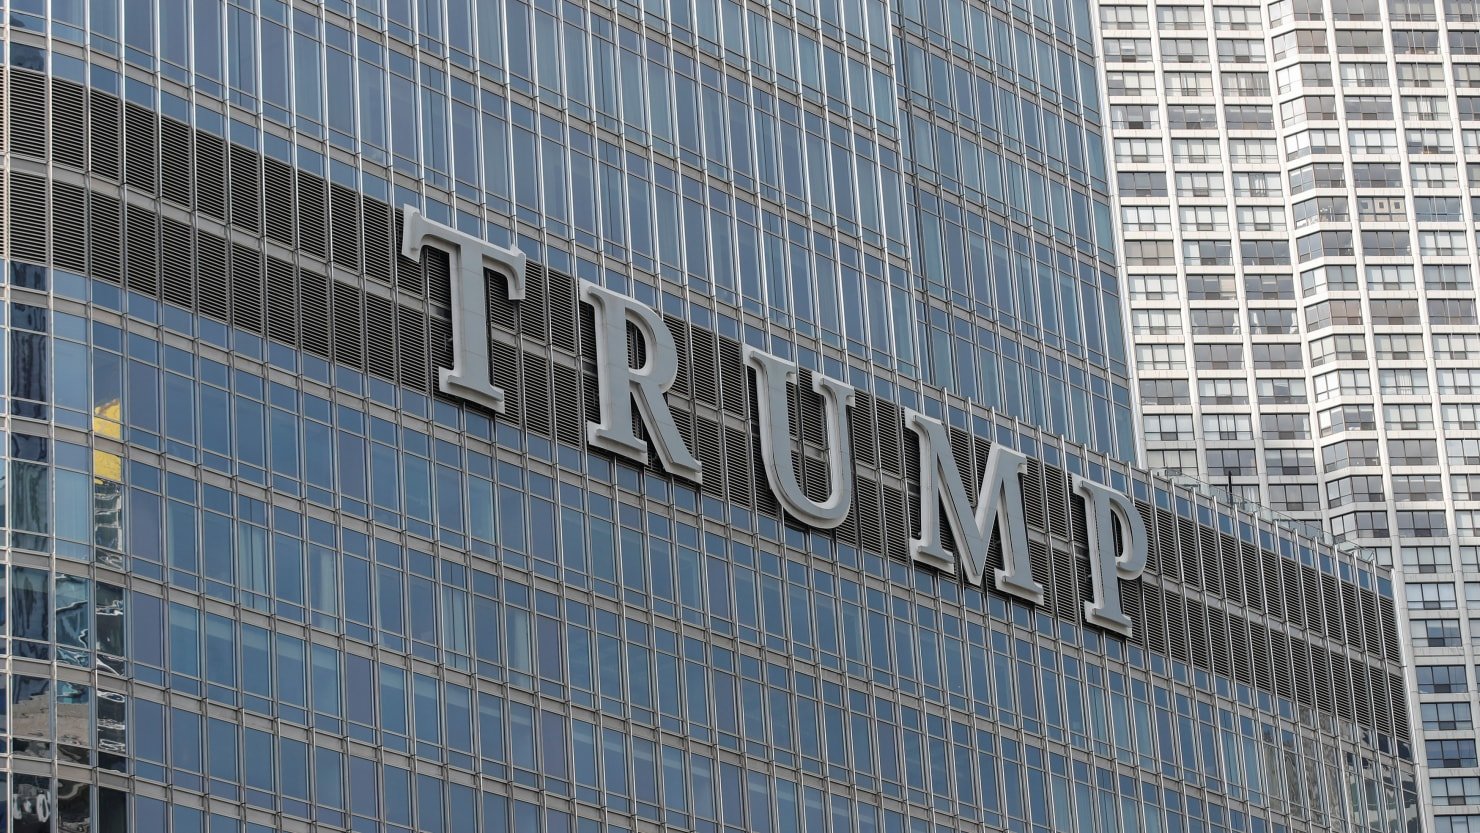 The report says banks have forgiven hundreds of millions of debt that Trump owned from a Chicago skyscraper